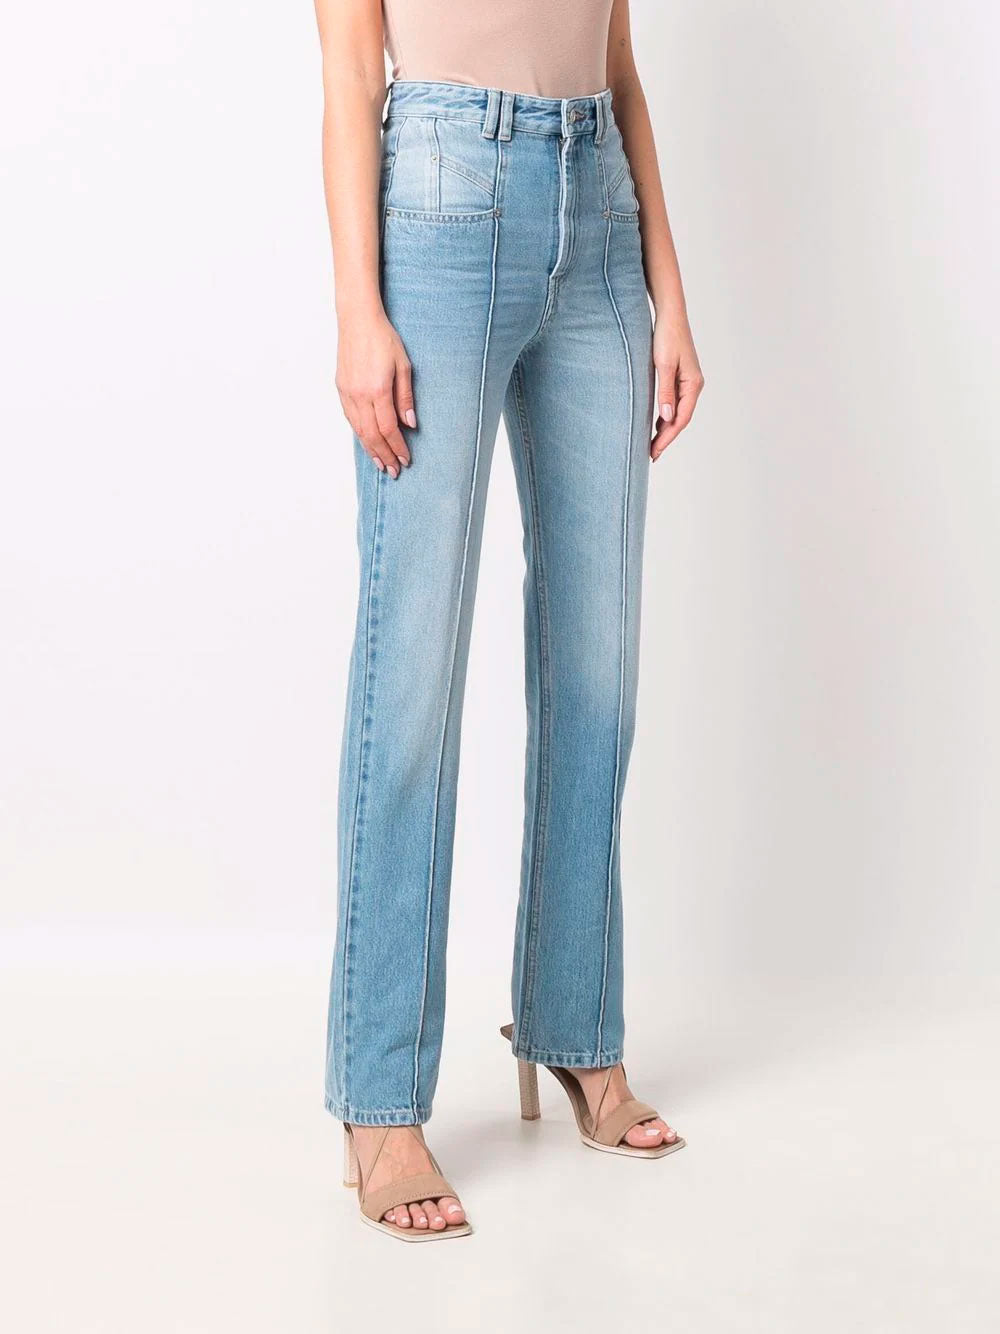 Isabel Marant high-waisted jeans